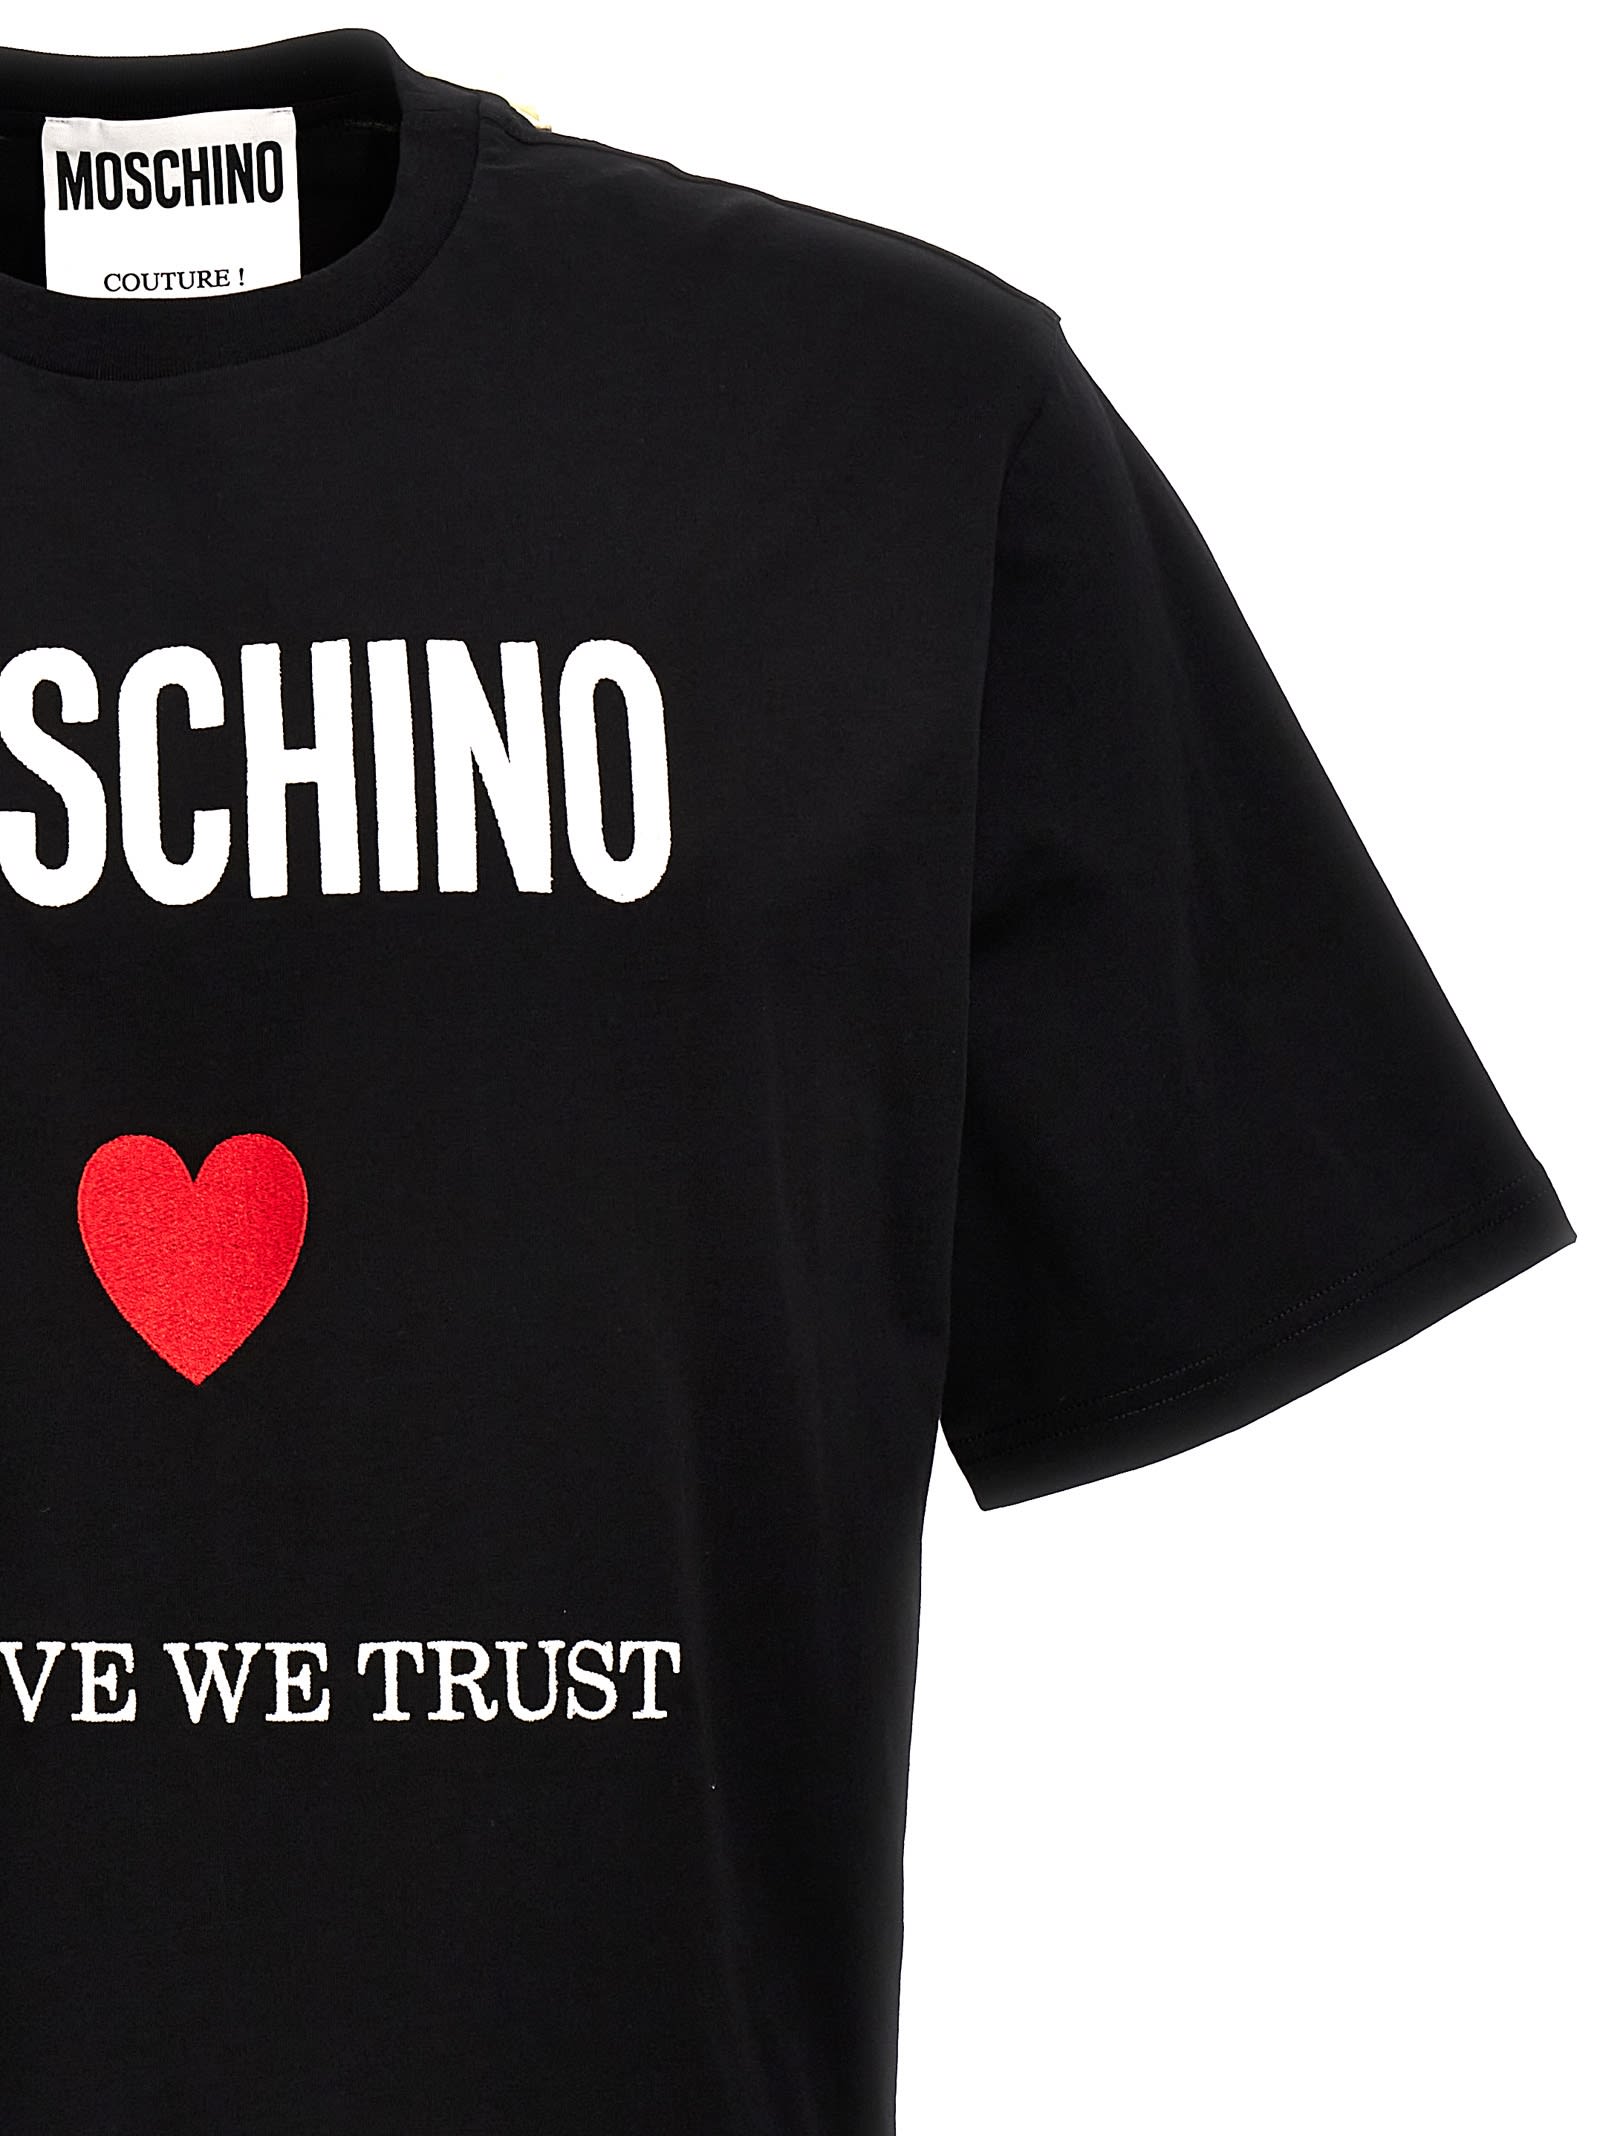 Shop Moschino In Love We Trust T-shirt In 1555